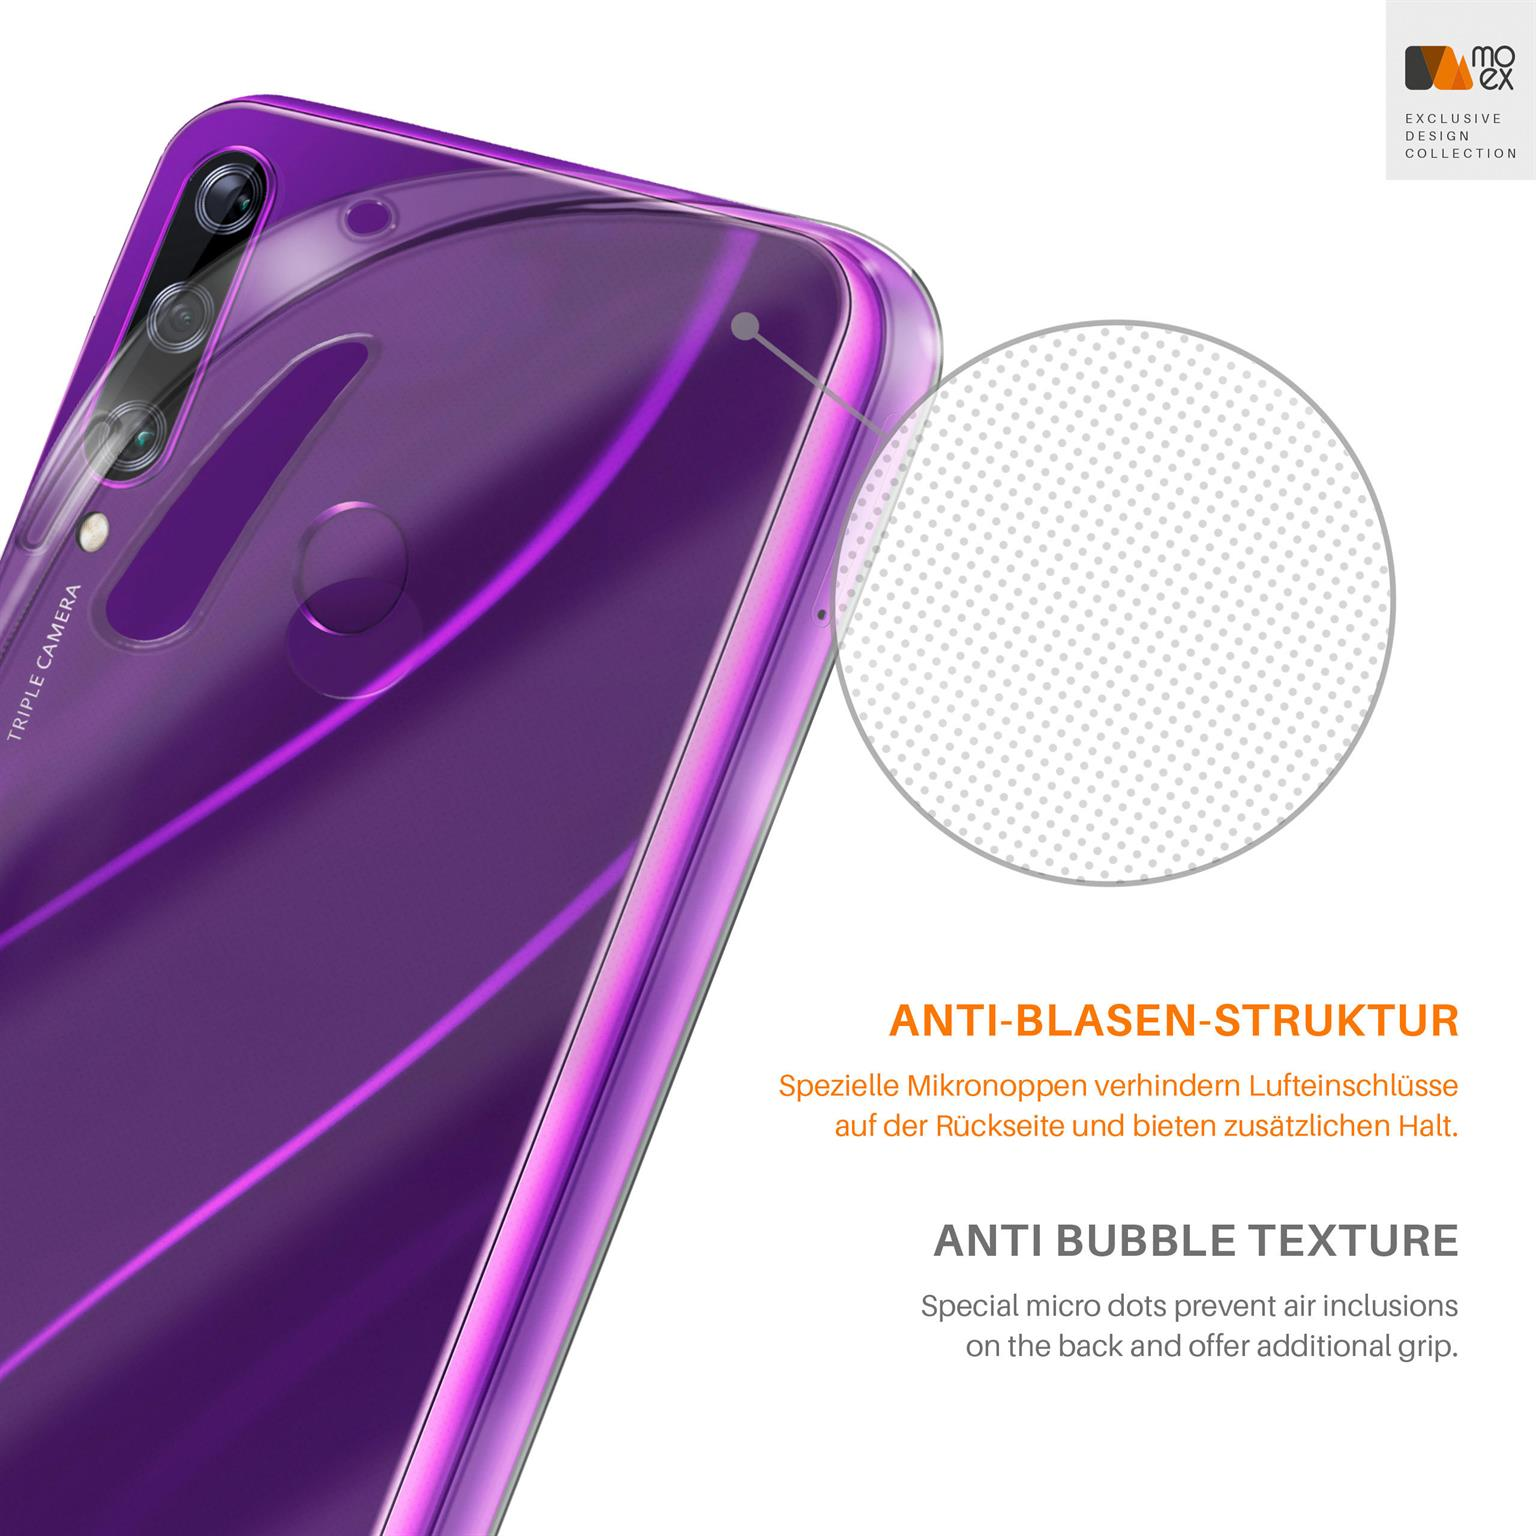 Backcover, Aero Y6p, Huawei, MOEX Crystal-Clear Case,